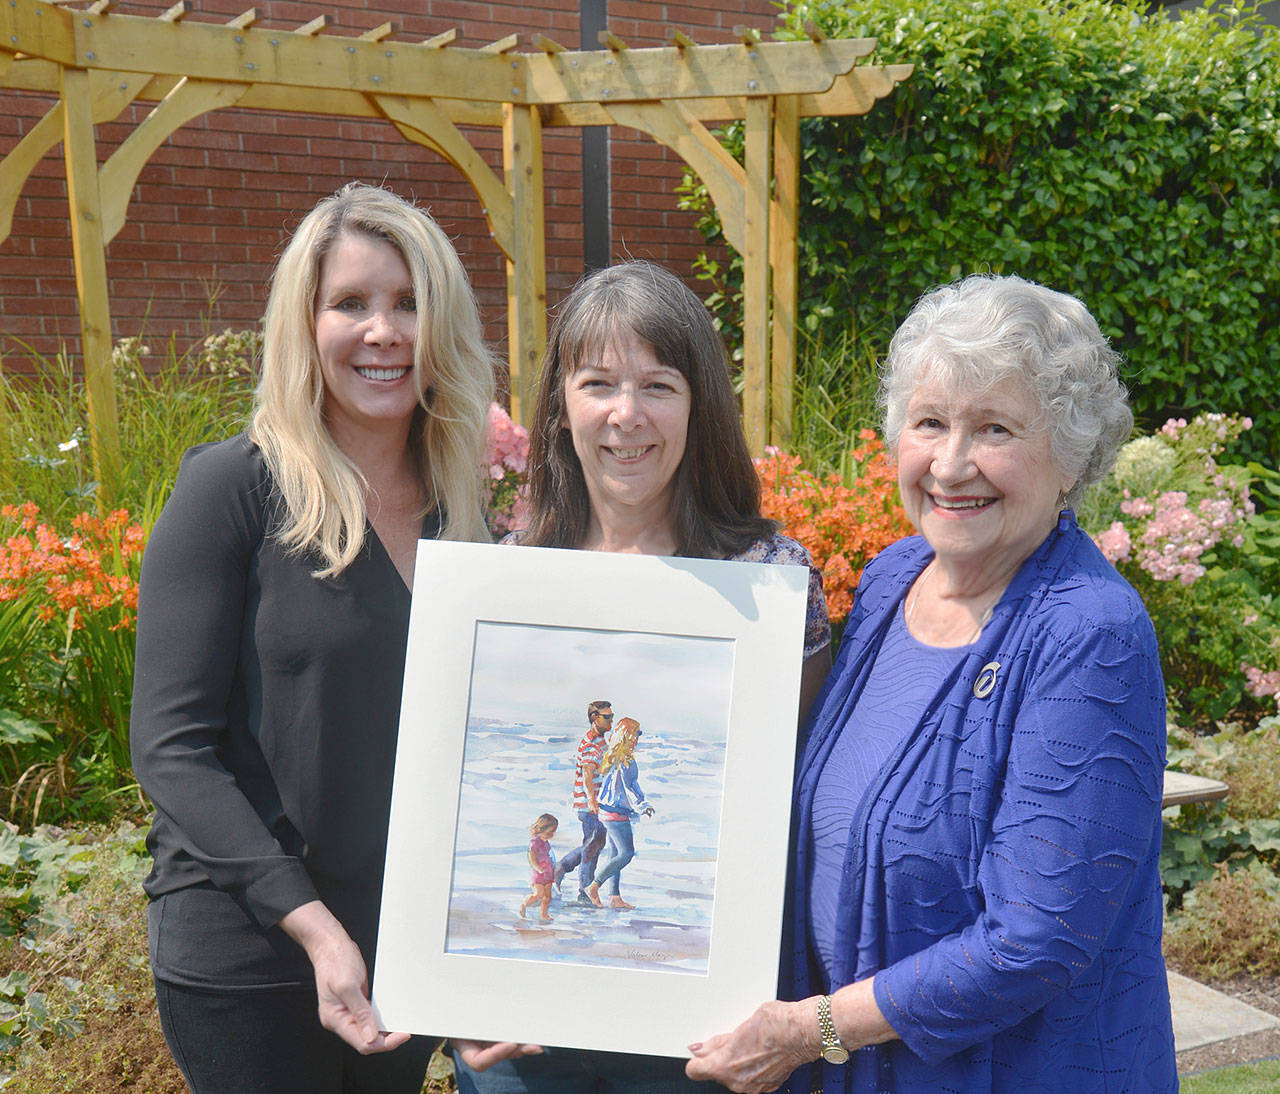 Contributed photo — Whidbey Telecom co-CEO Julia Henny (left) and Chairperson Marion Henny (right) pose for a photo with Valerie Mayer, whose artwork will appear on the cover of the Whidbey Telecom’s directory.